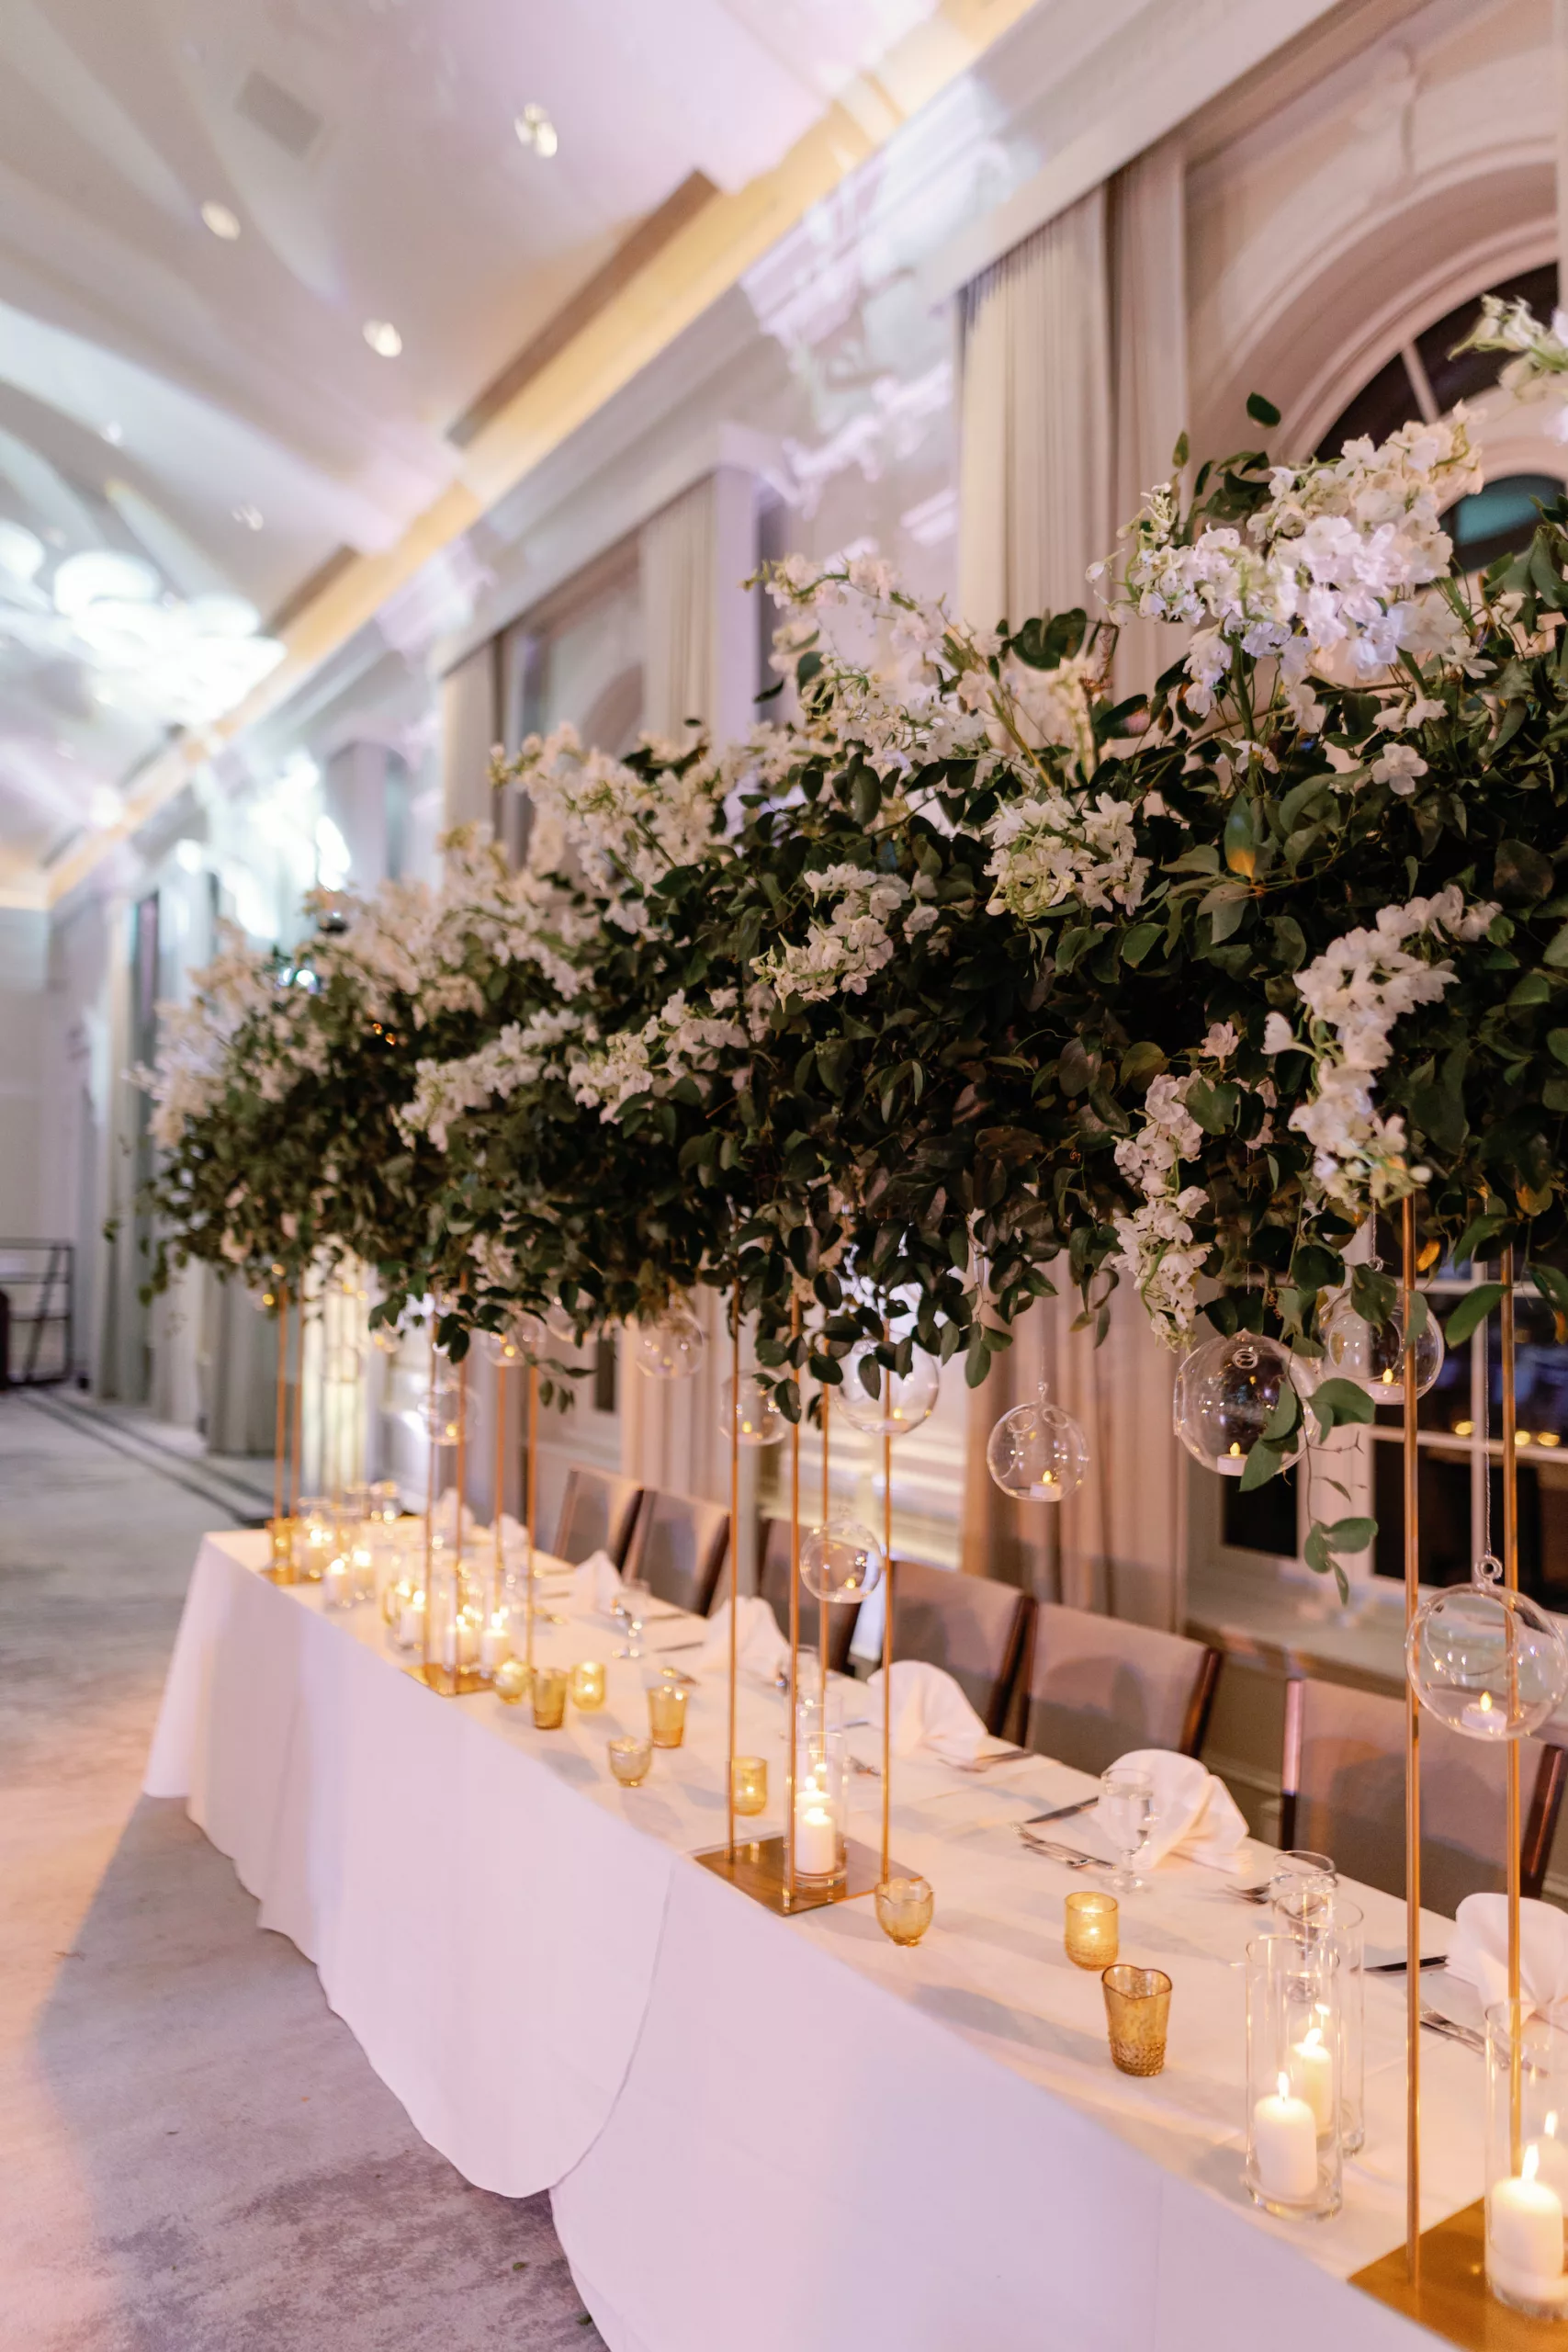 Luxurious White and Gold Grand Ballroom Wedding Reception Head Table Decor Ideas | Hanging Glass Vase Globe Tealight Candle Holder, Long White Feasting Table, Tall Gold Floral Stand with Cascading Greenery and White Flowers | Tampa Bay Event Planner Coastal Coordinating